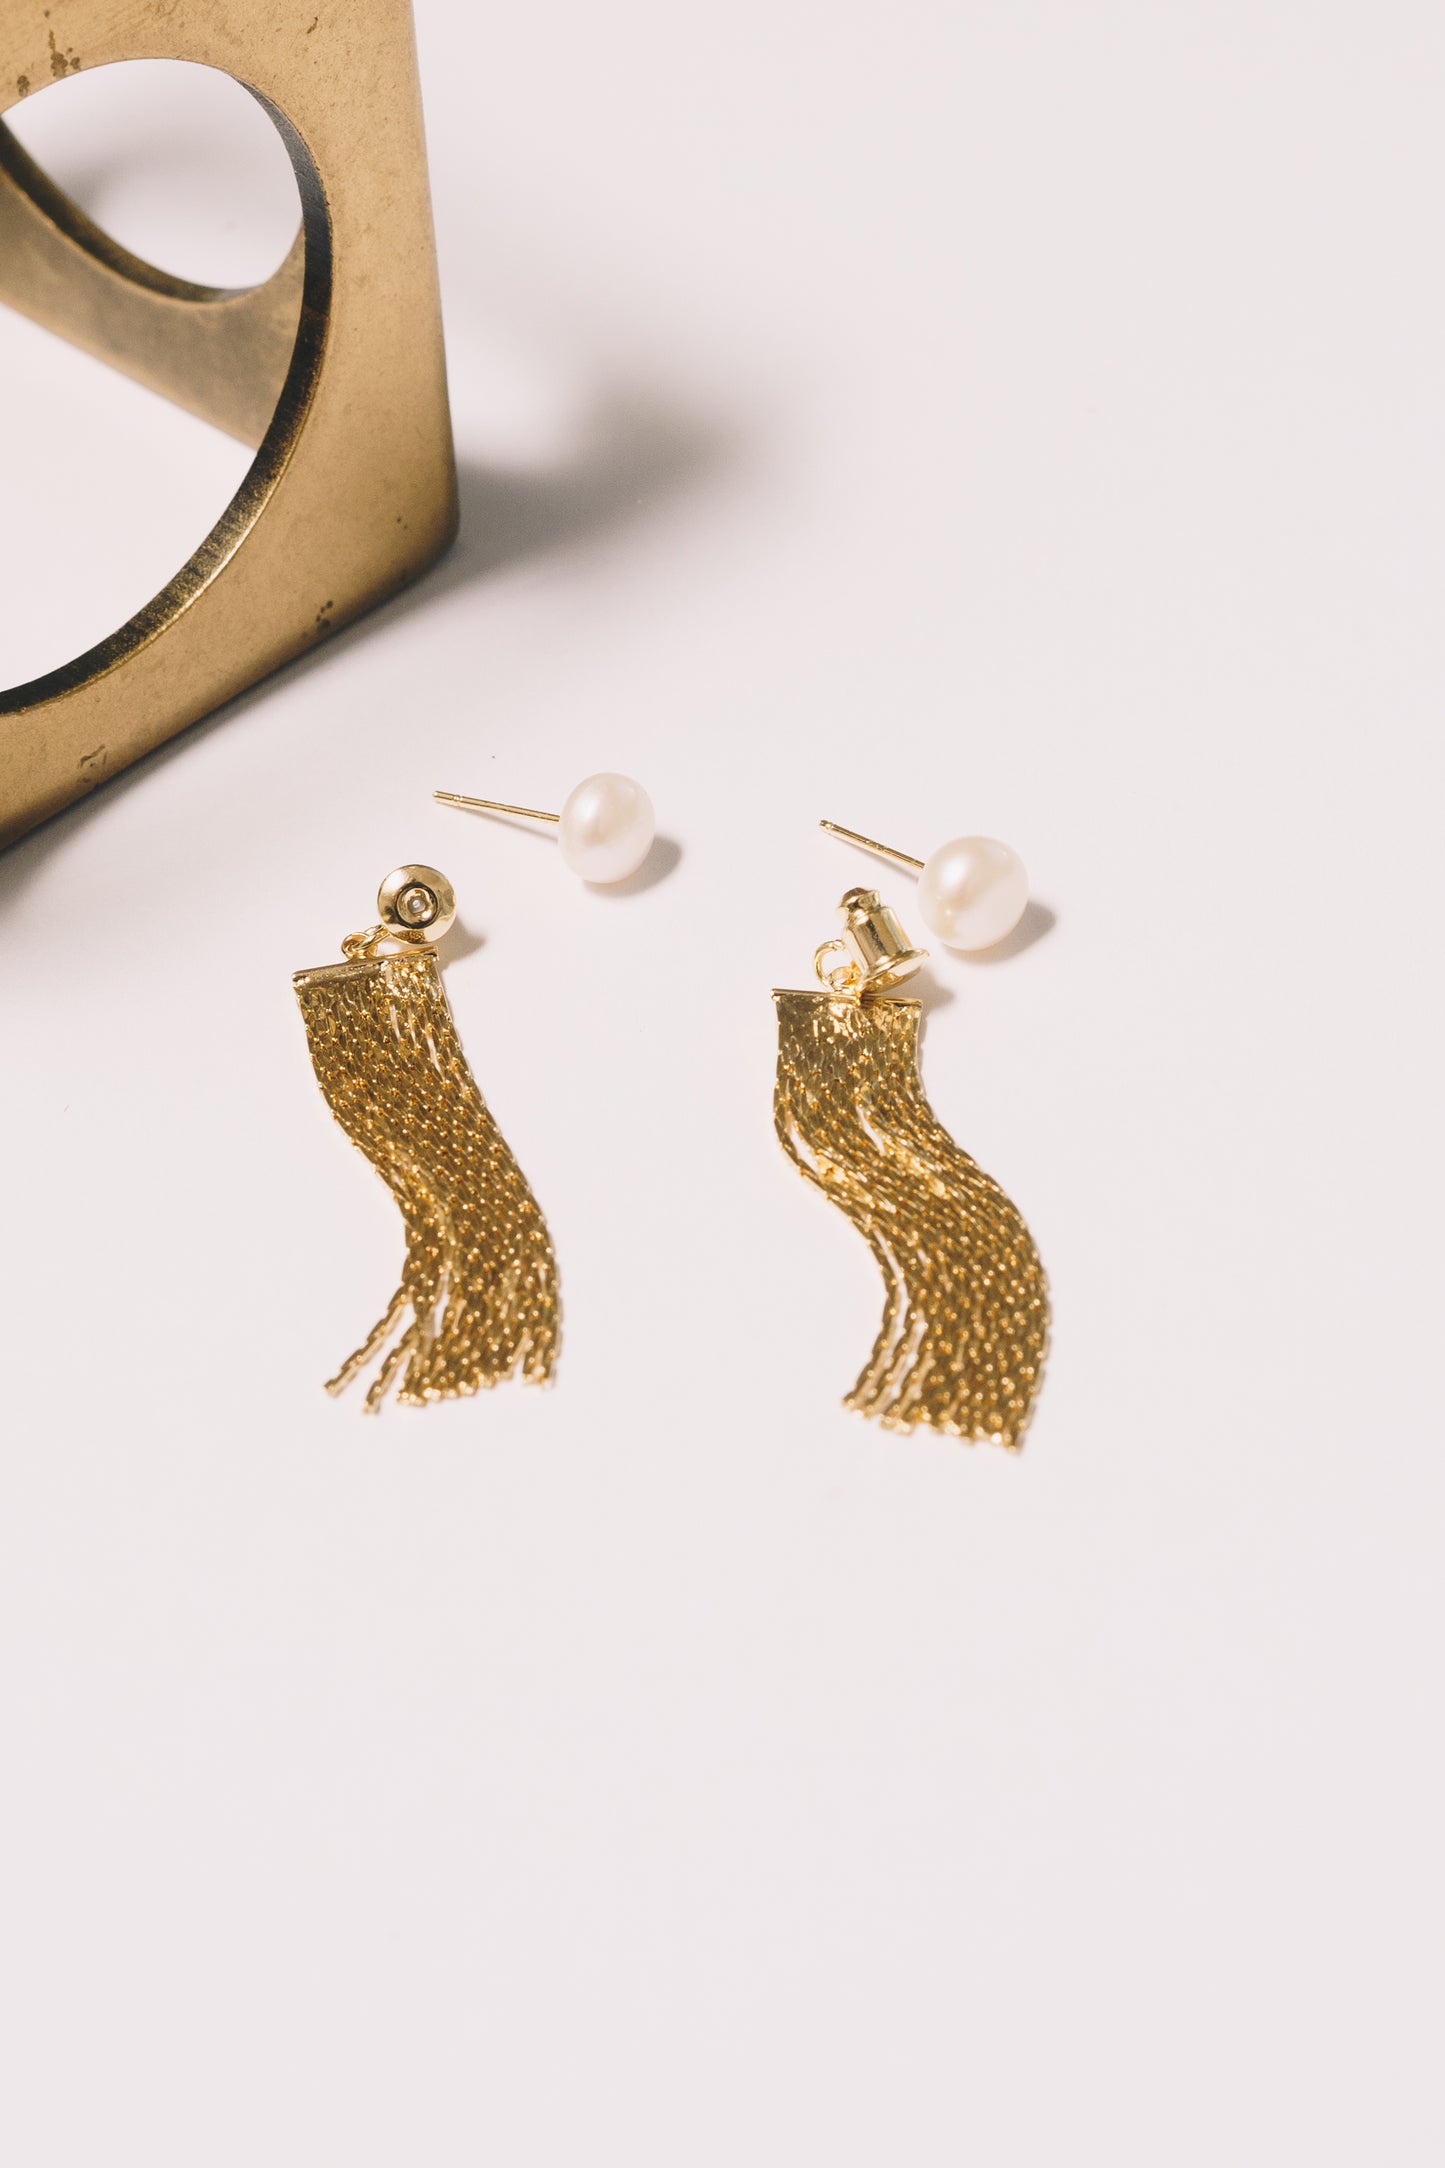 pearl studs with gold tassel earring jackets